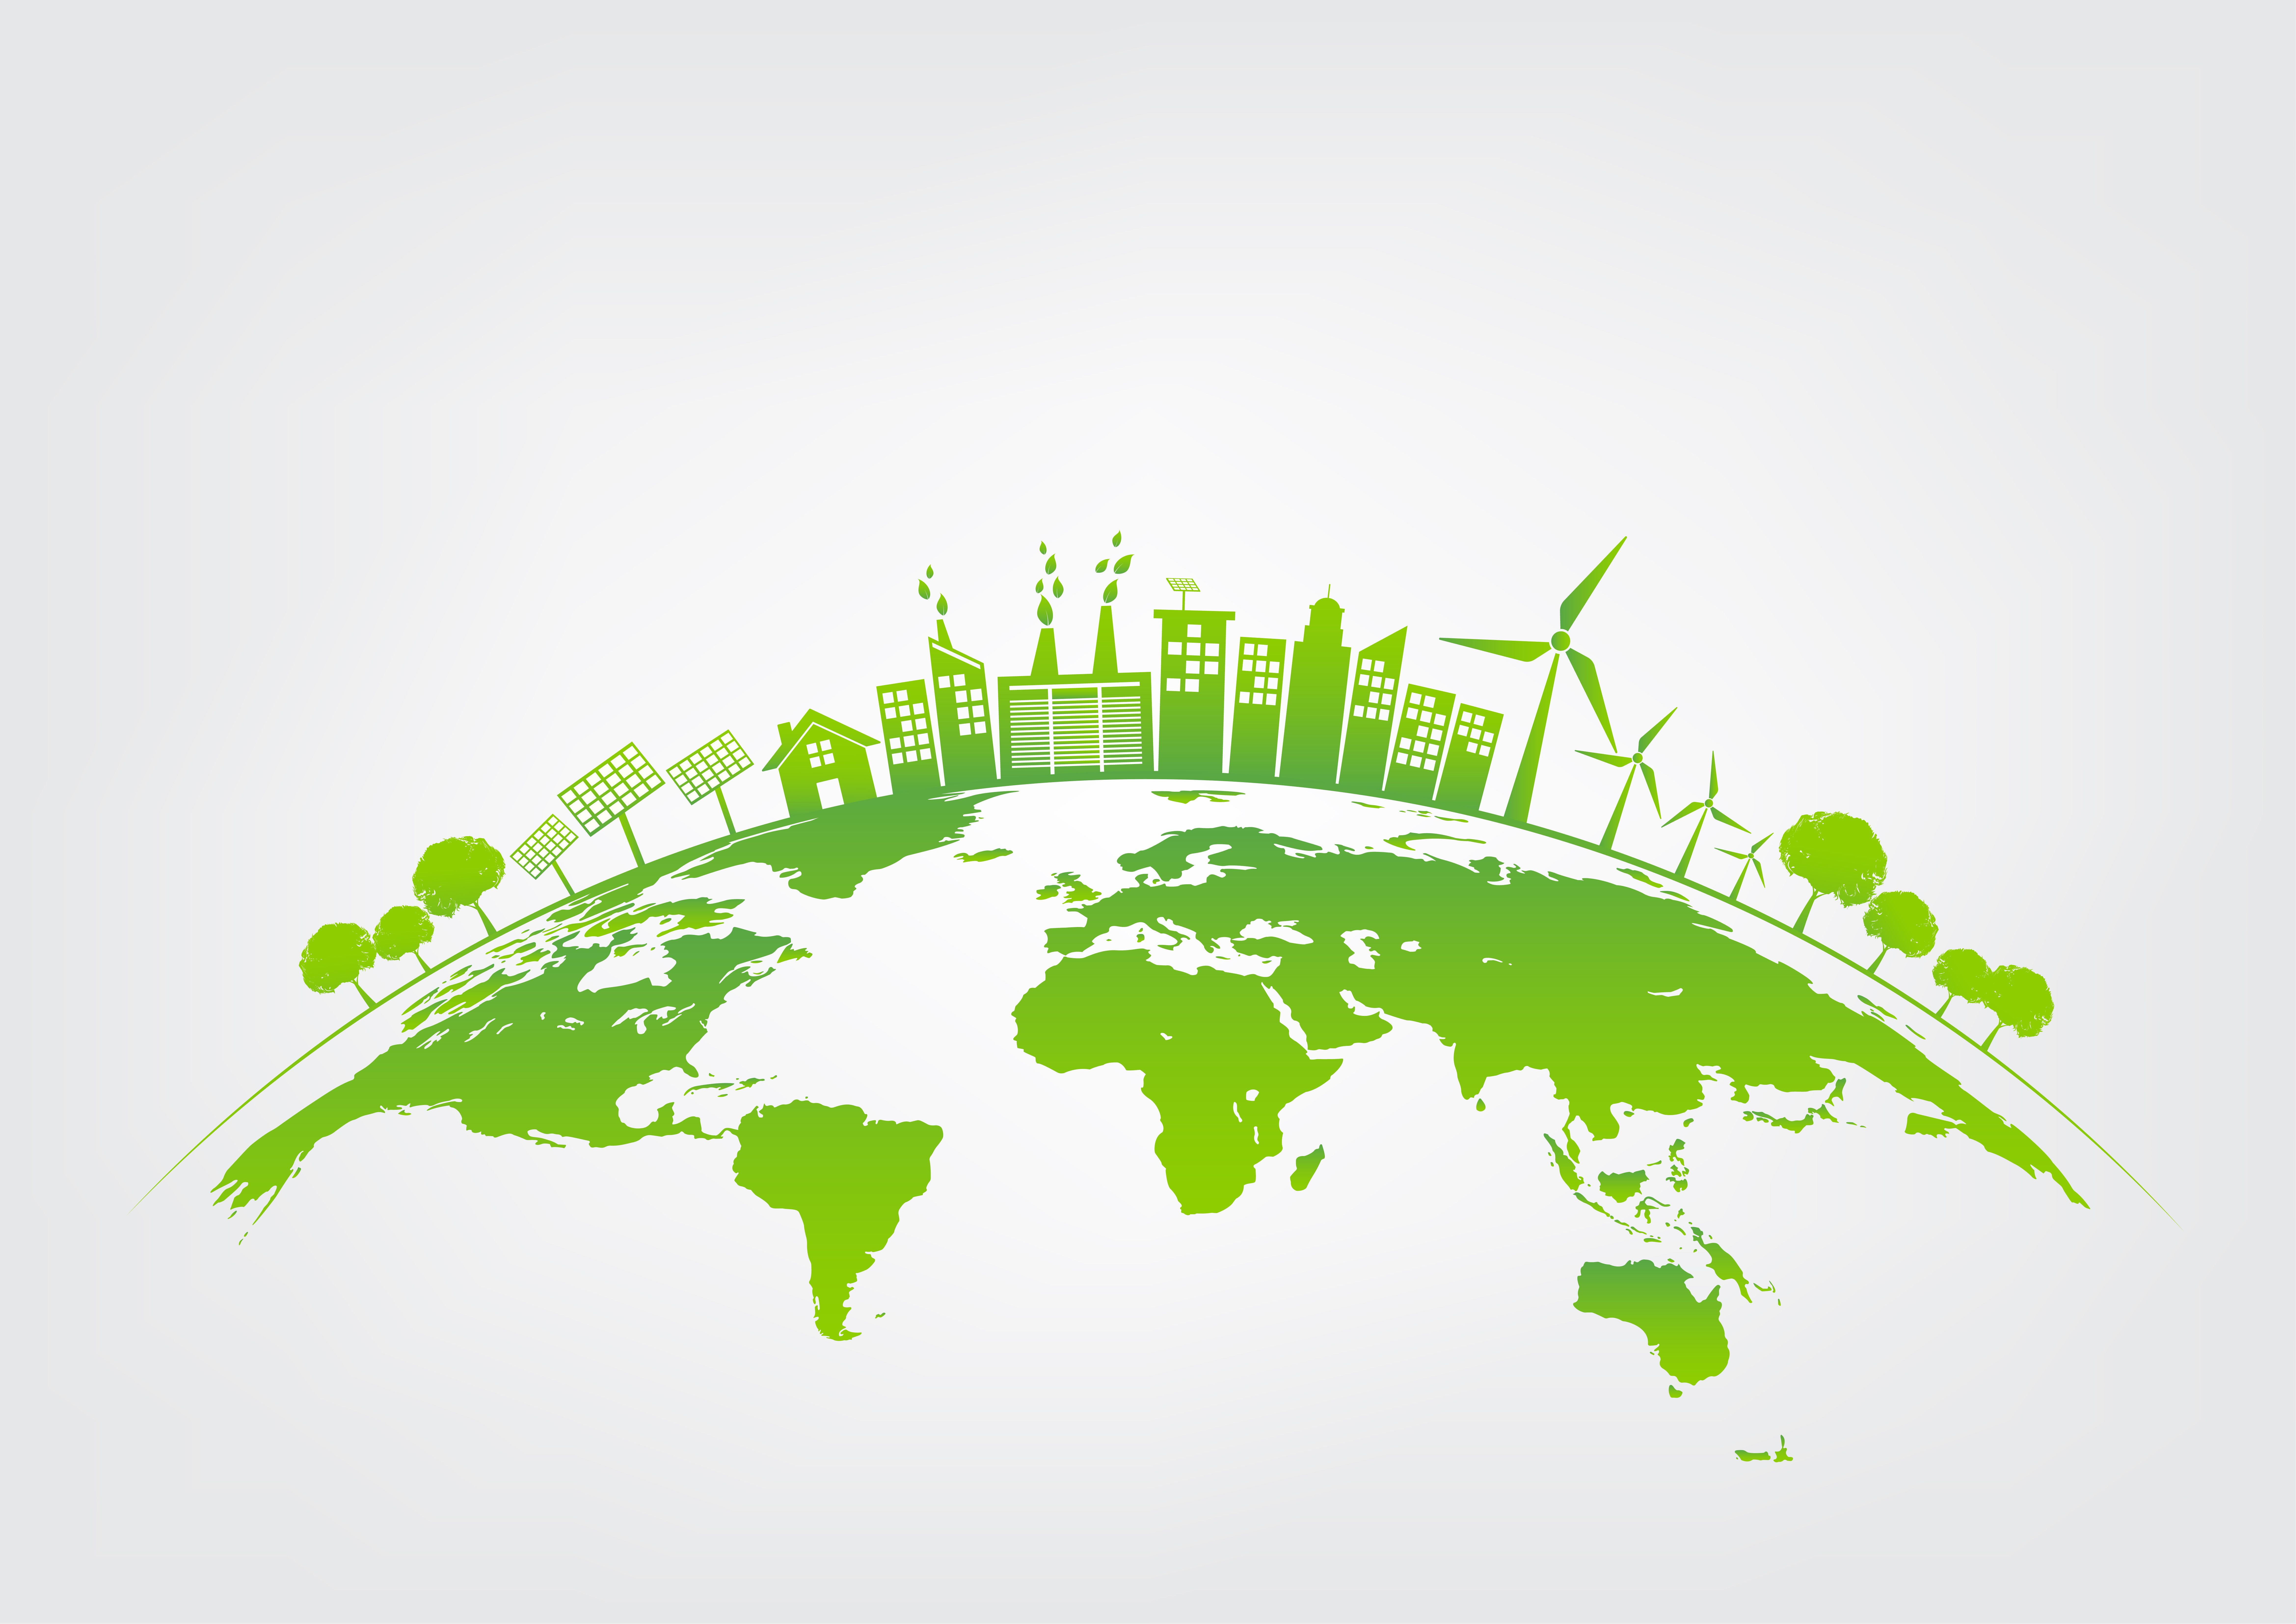 How to “go green” and improve your business’ image image